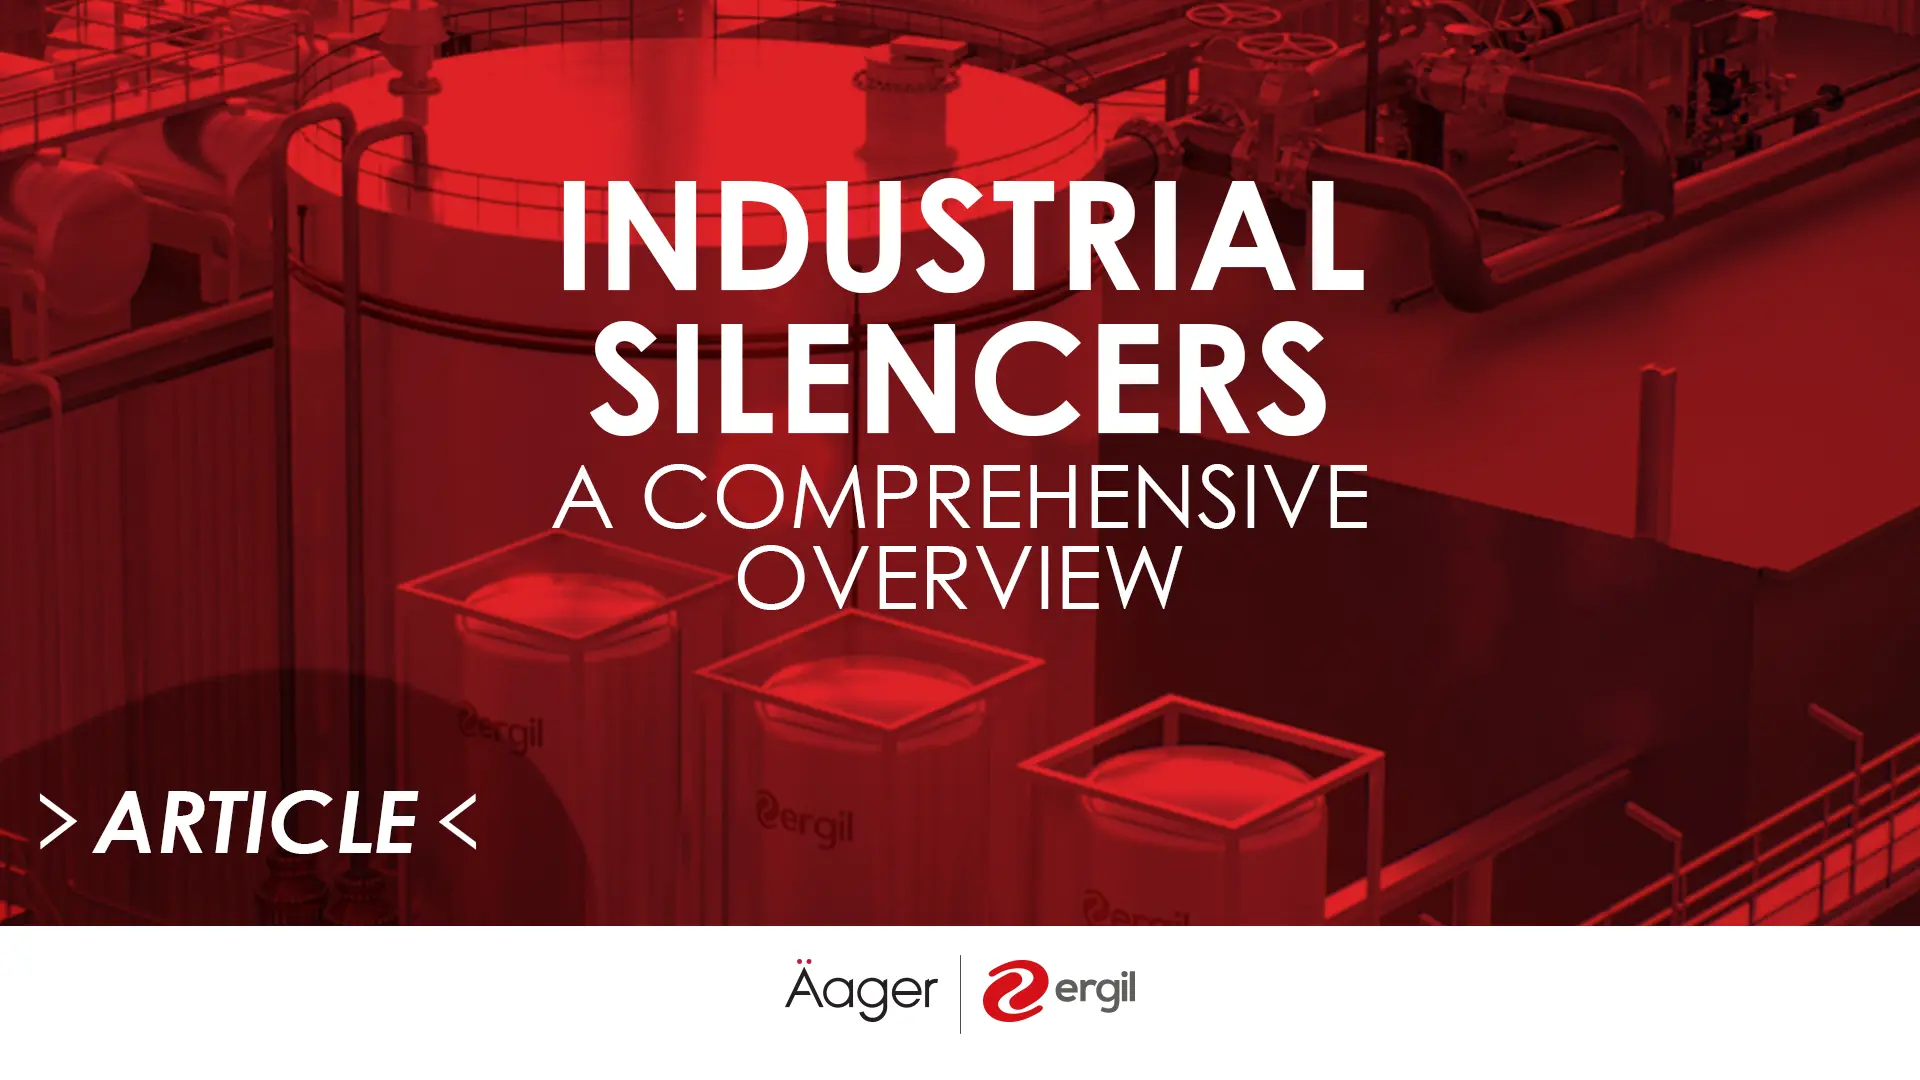 Industrial Silencers: A Comprehensive Overview 31